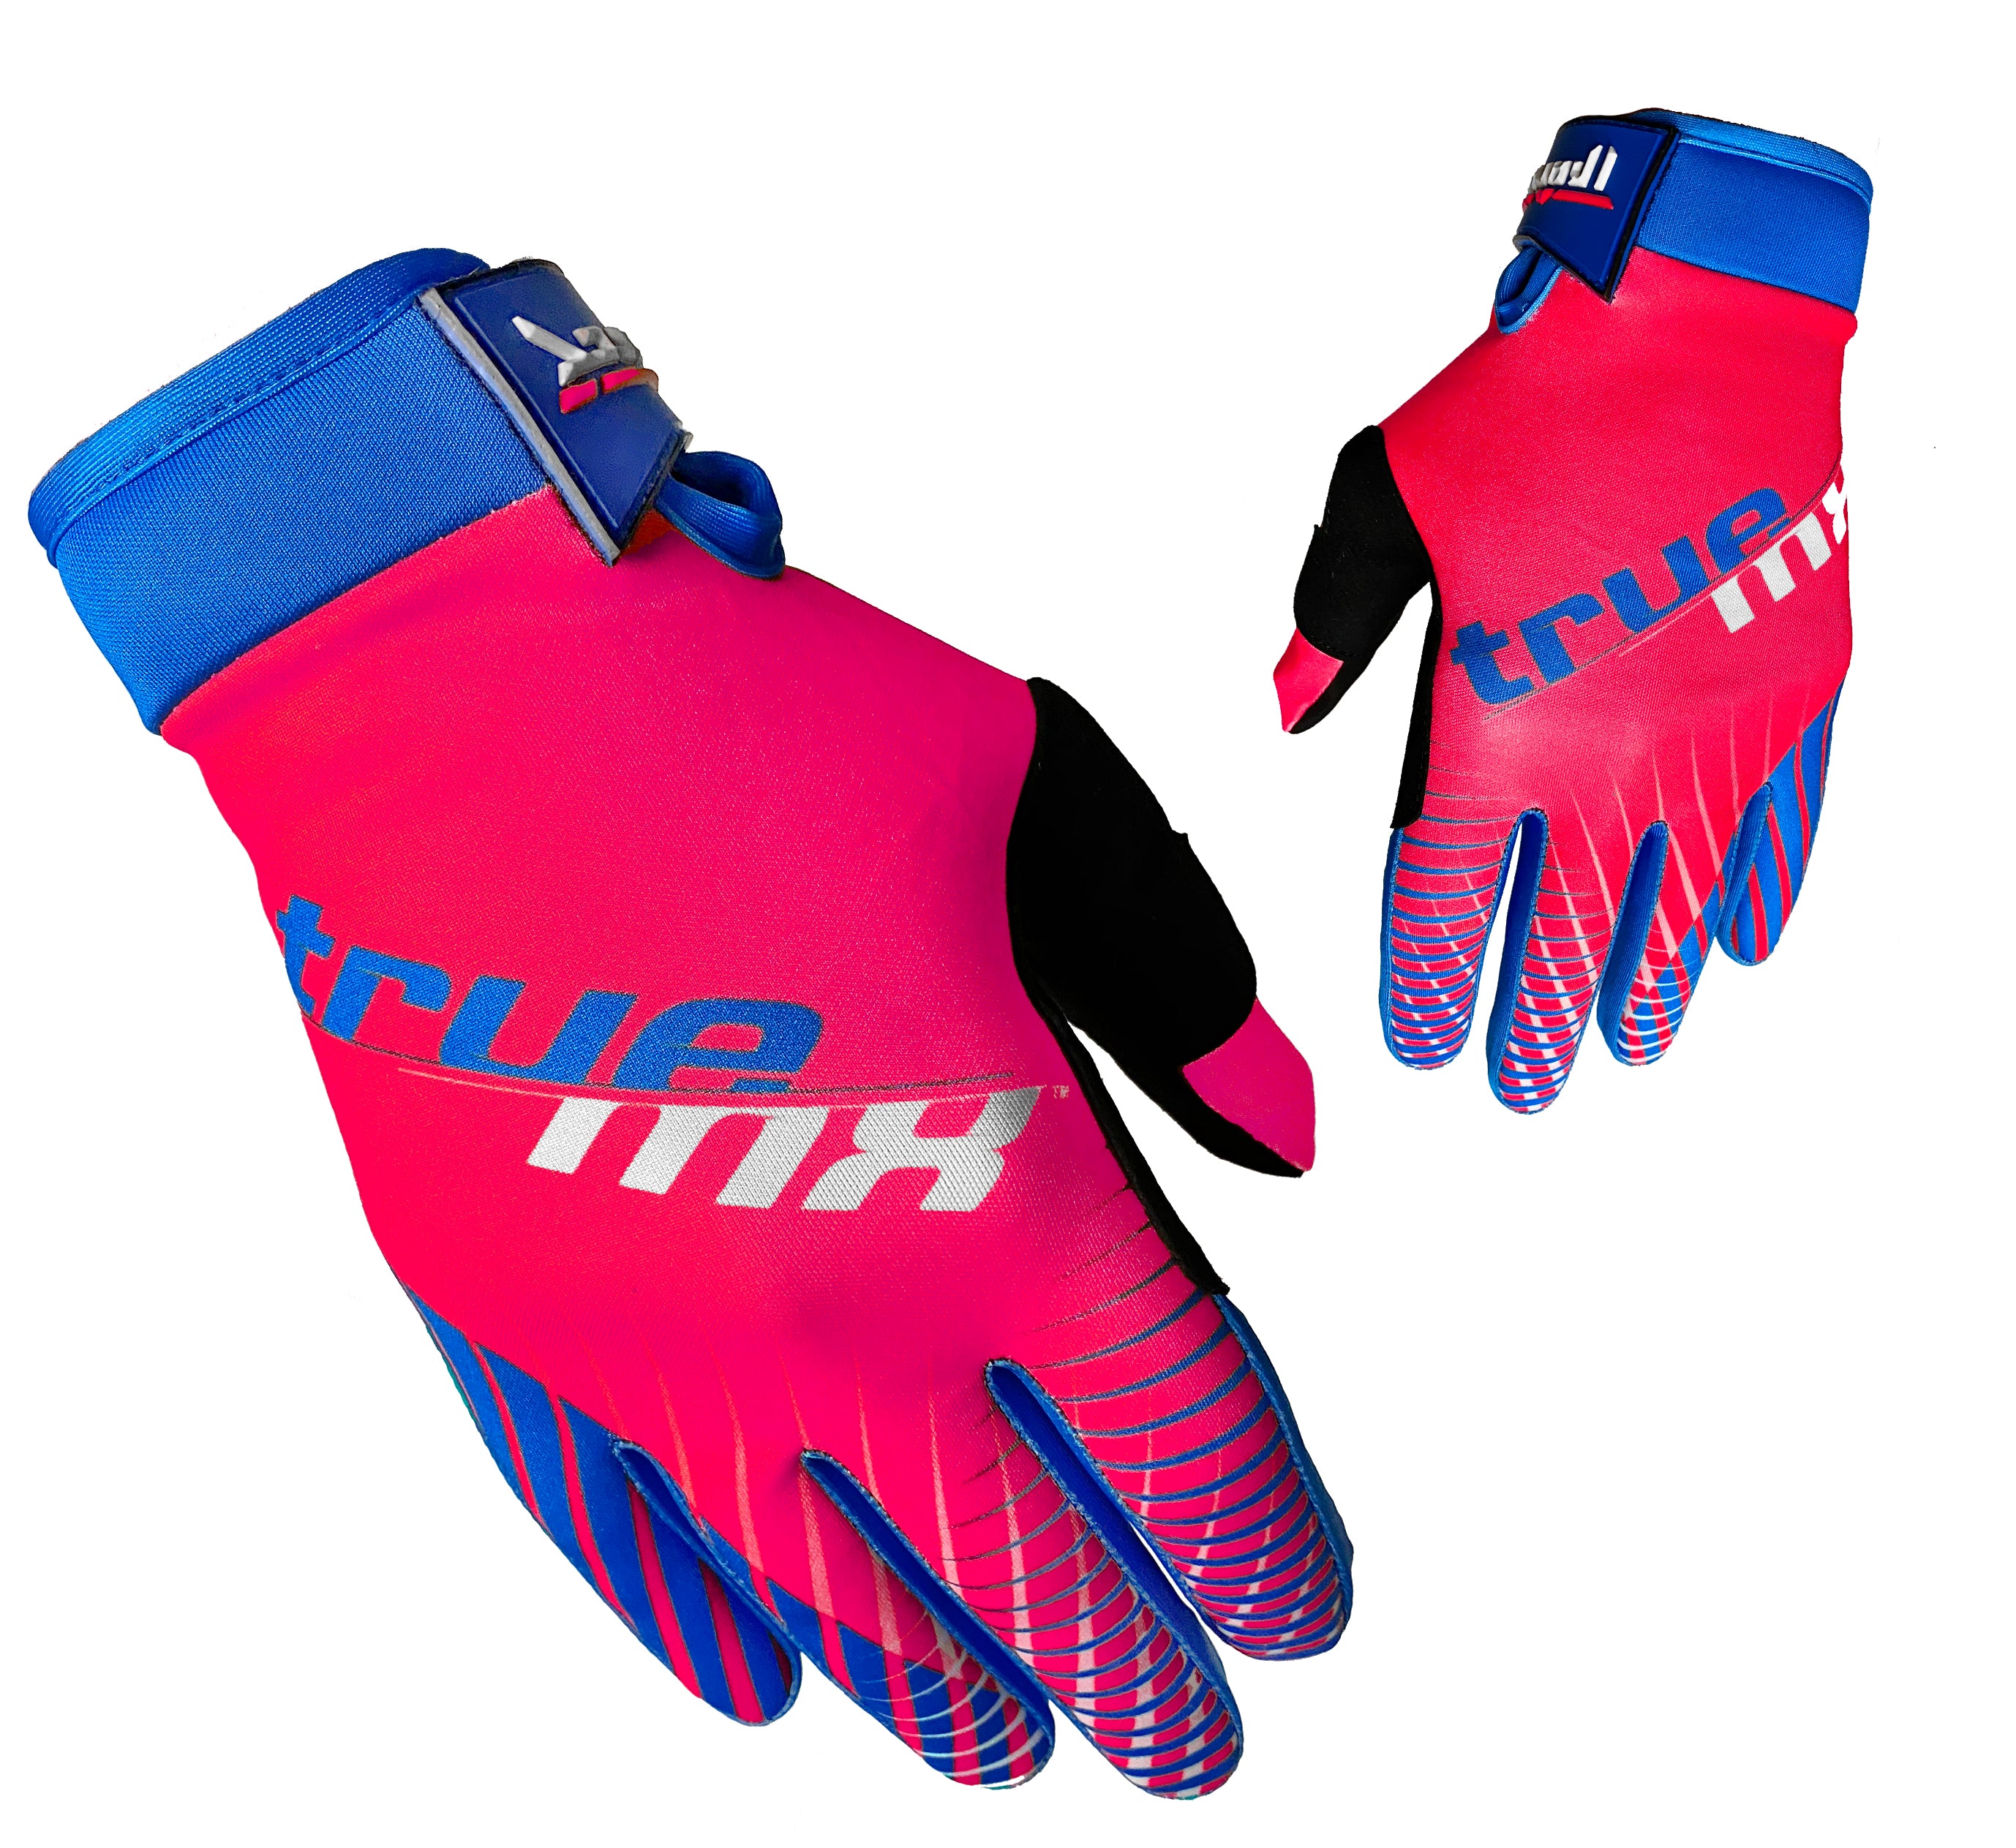 2021 TrueMX Transfer Gloves - PINK/BLUE (CLOSEOUT)